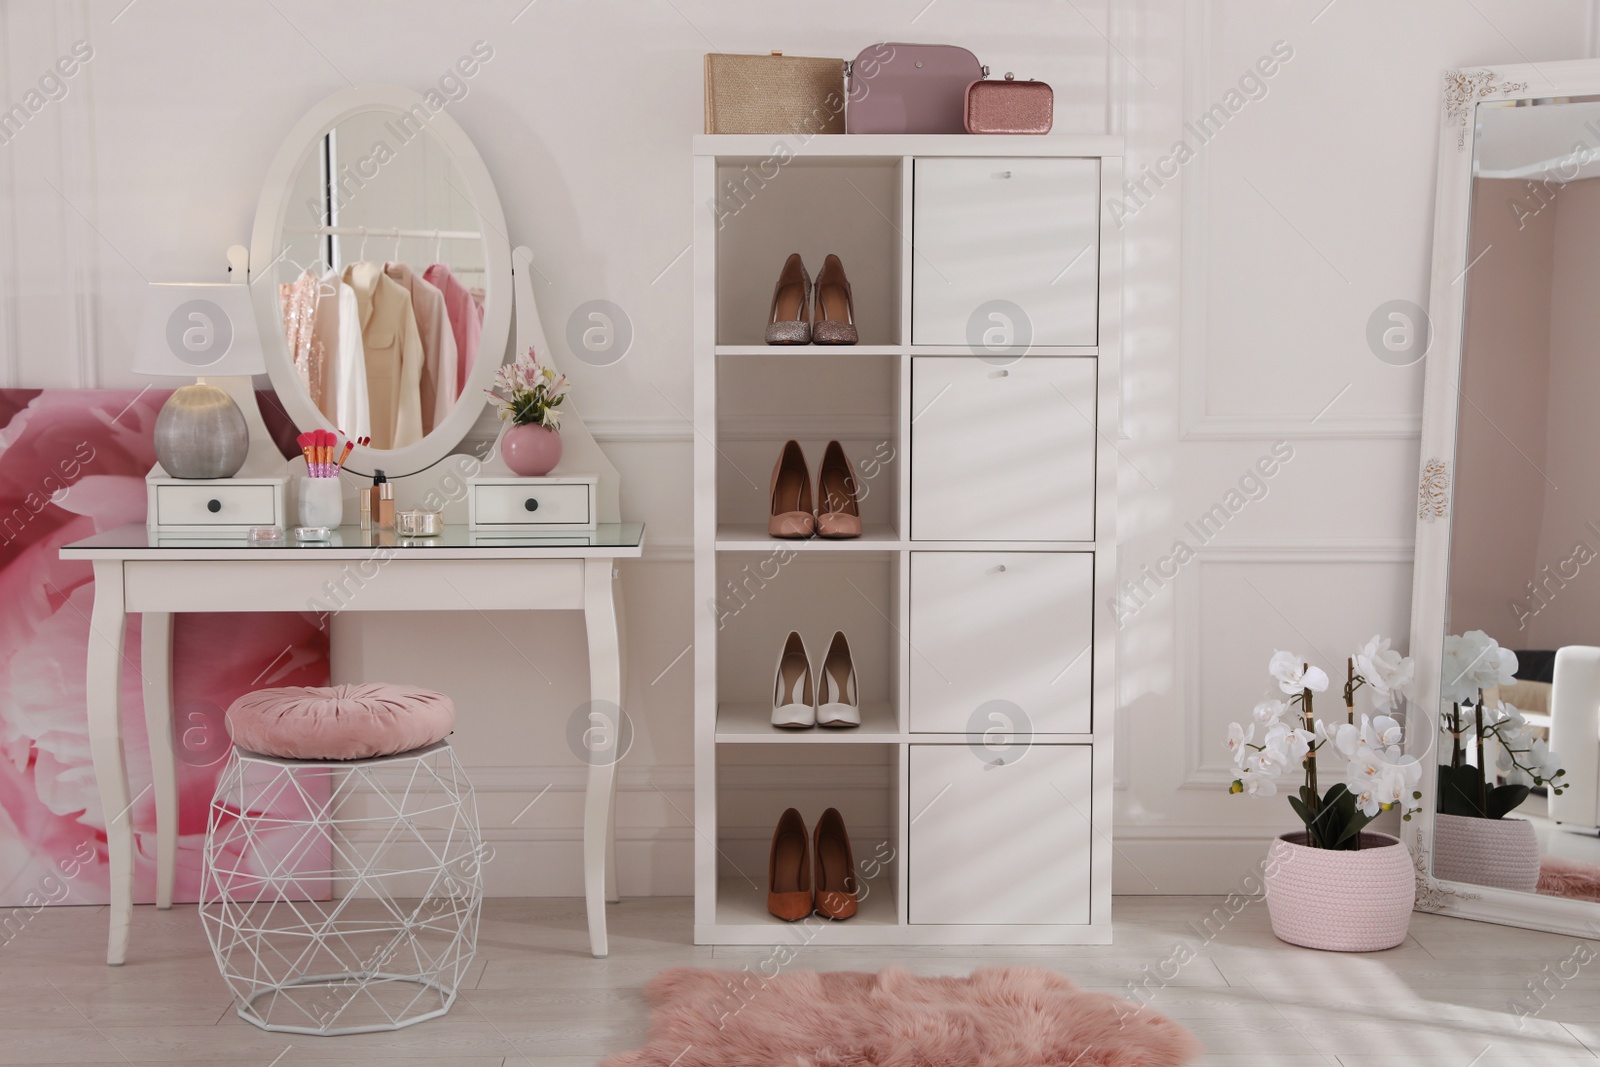 Photo of Stylish dressing room interior with shelving unit, table and mirror